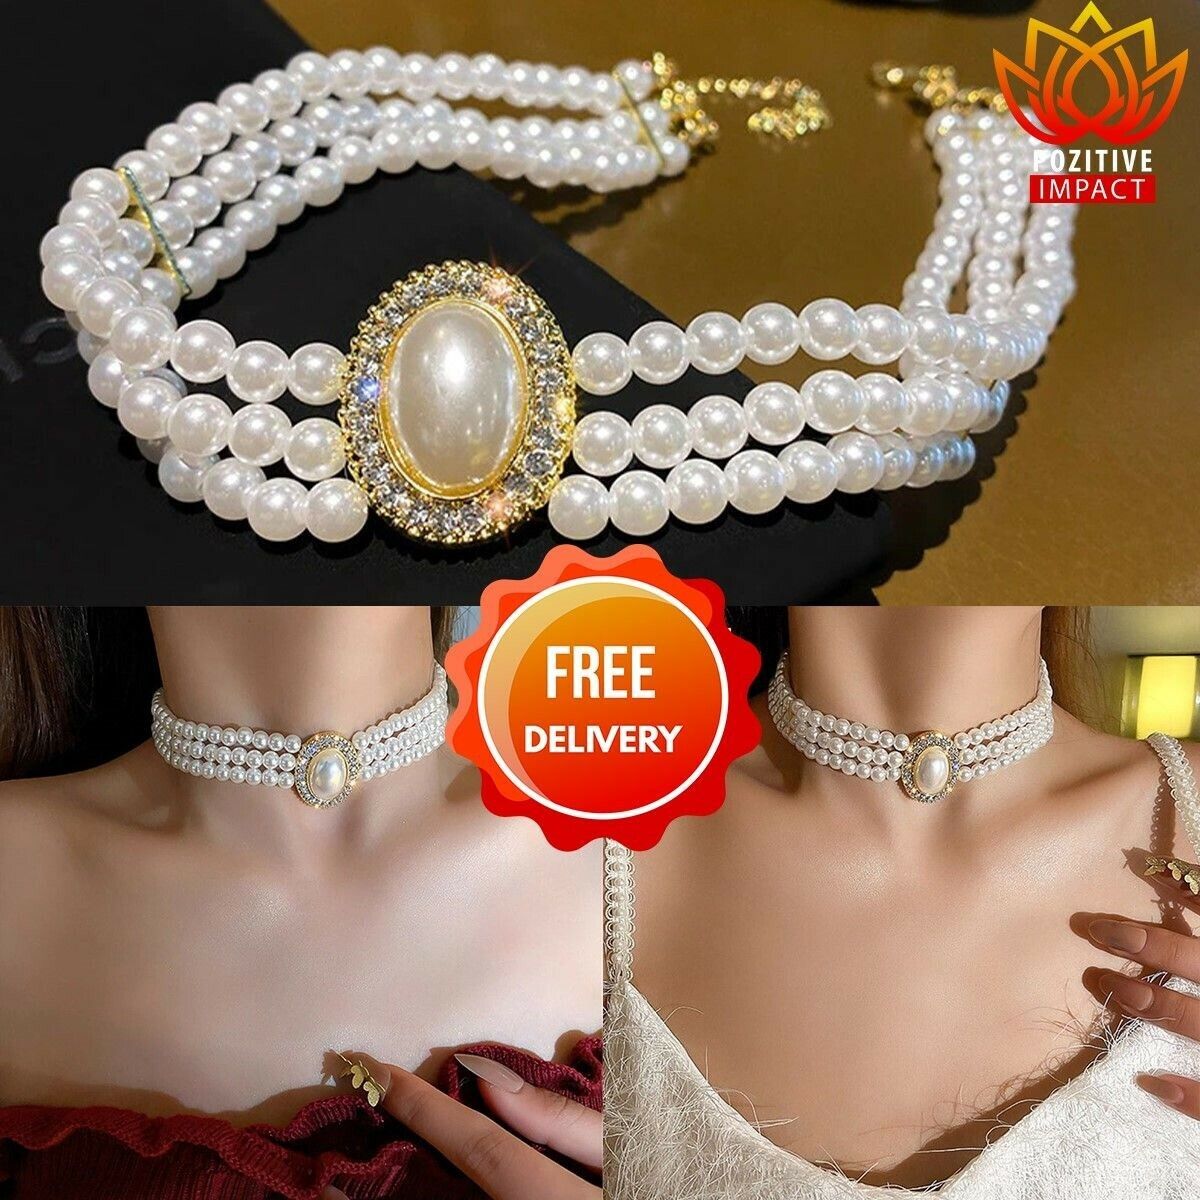 campingvogn reference tuberkulose Vintage Pearl Choker Necklace Luxury Multilayer With Crystal Gem Pendant  Scenic | eBay